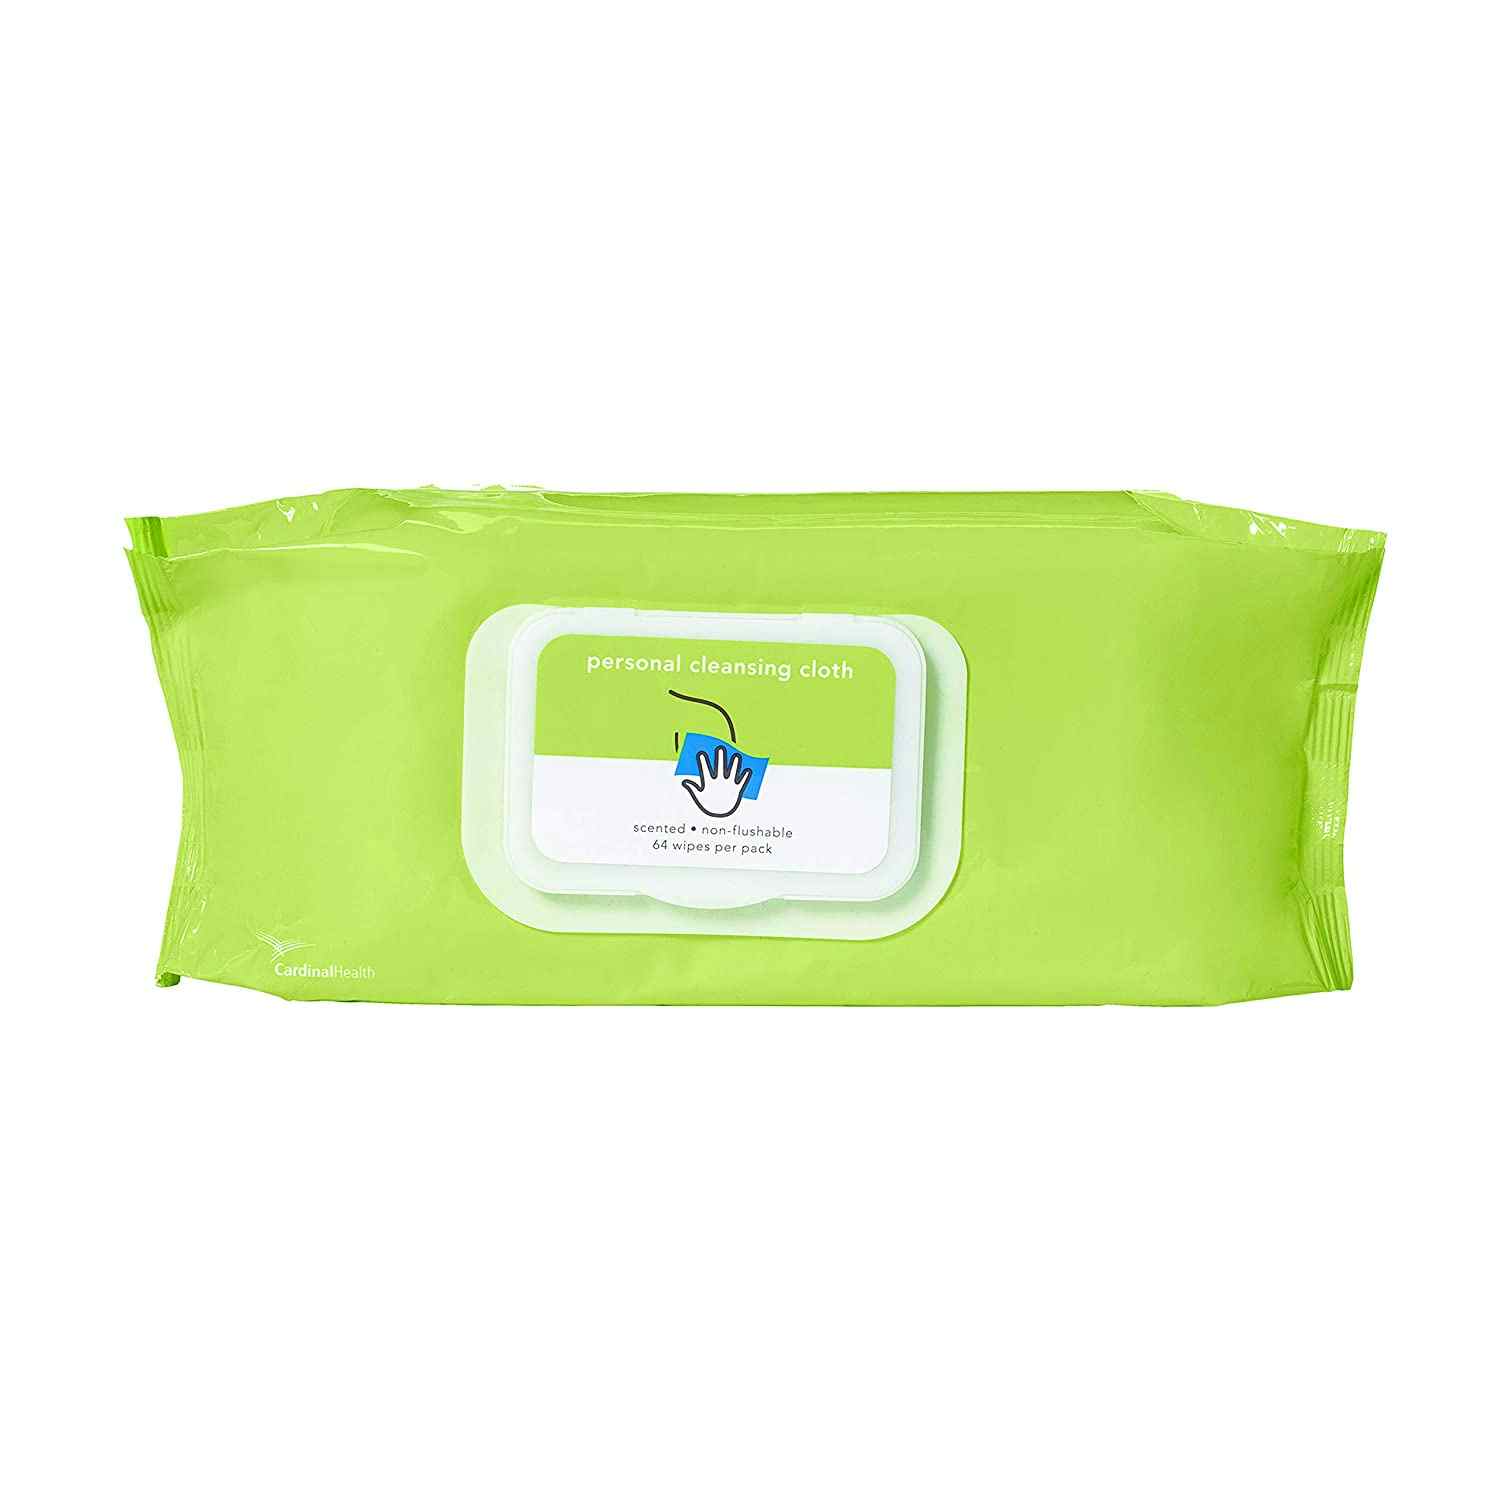 Cardinal Personal Cleansing Cloth, Non-flushable